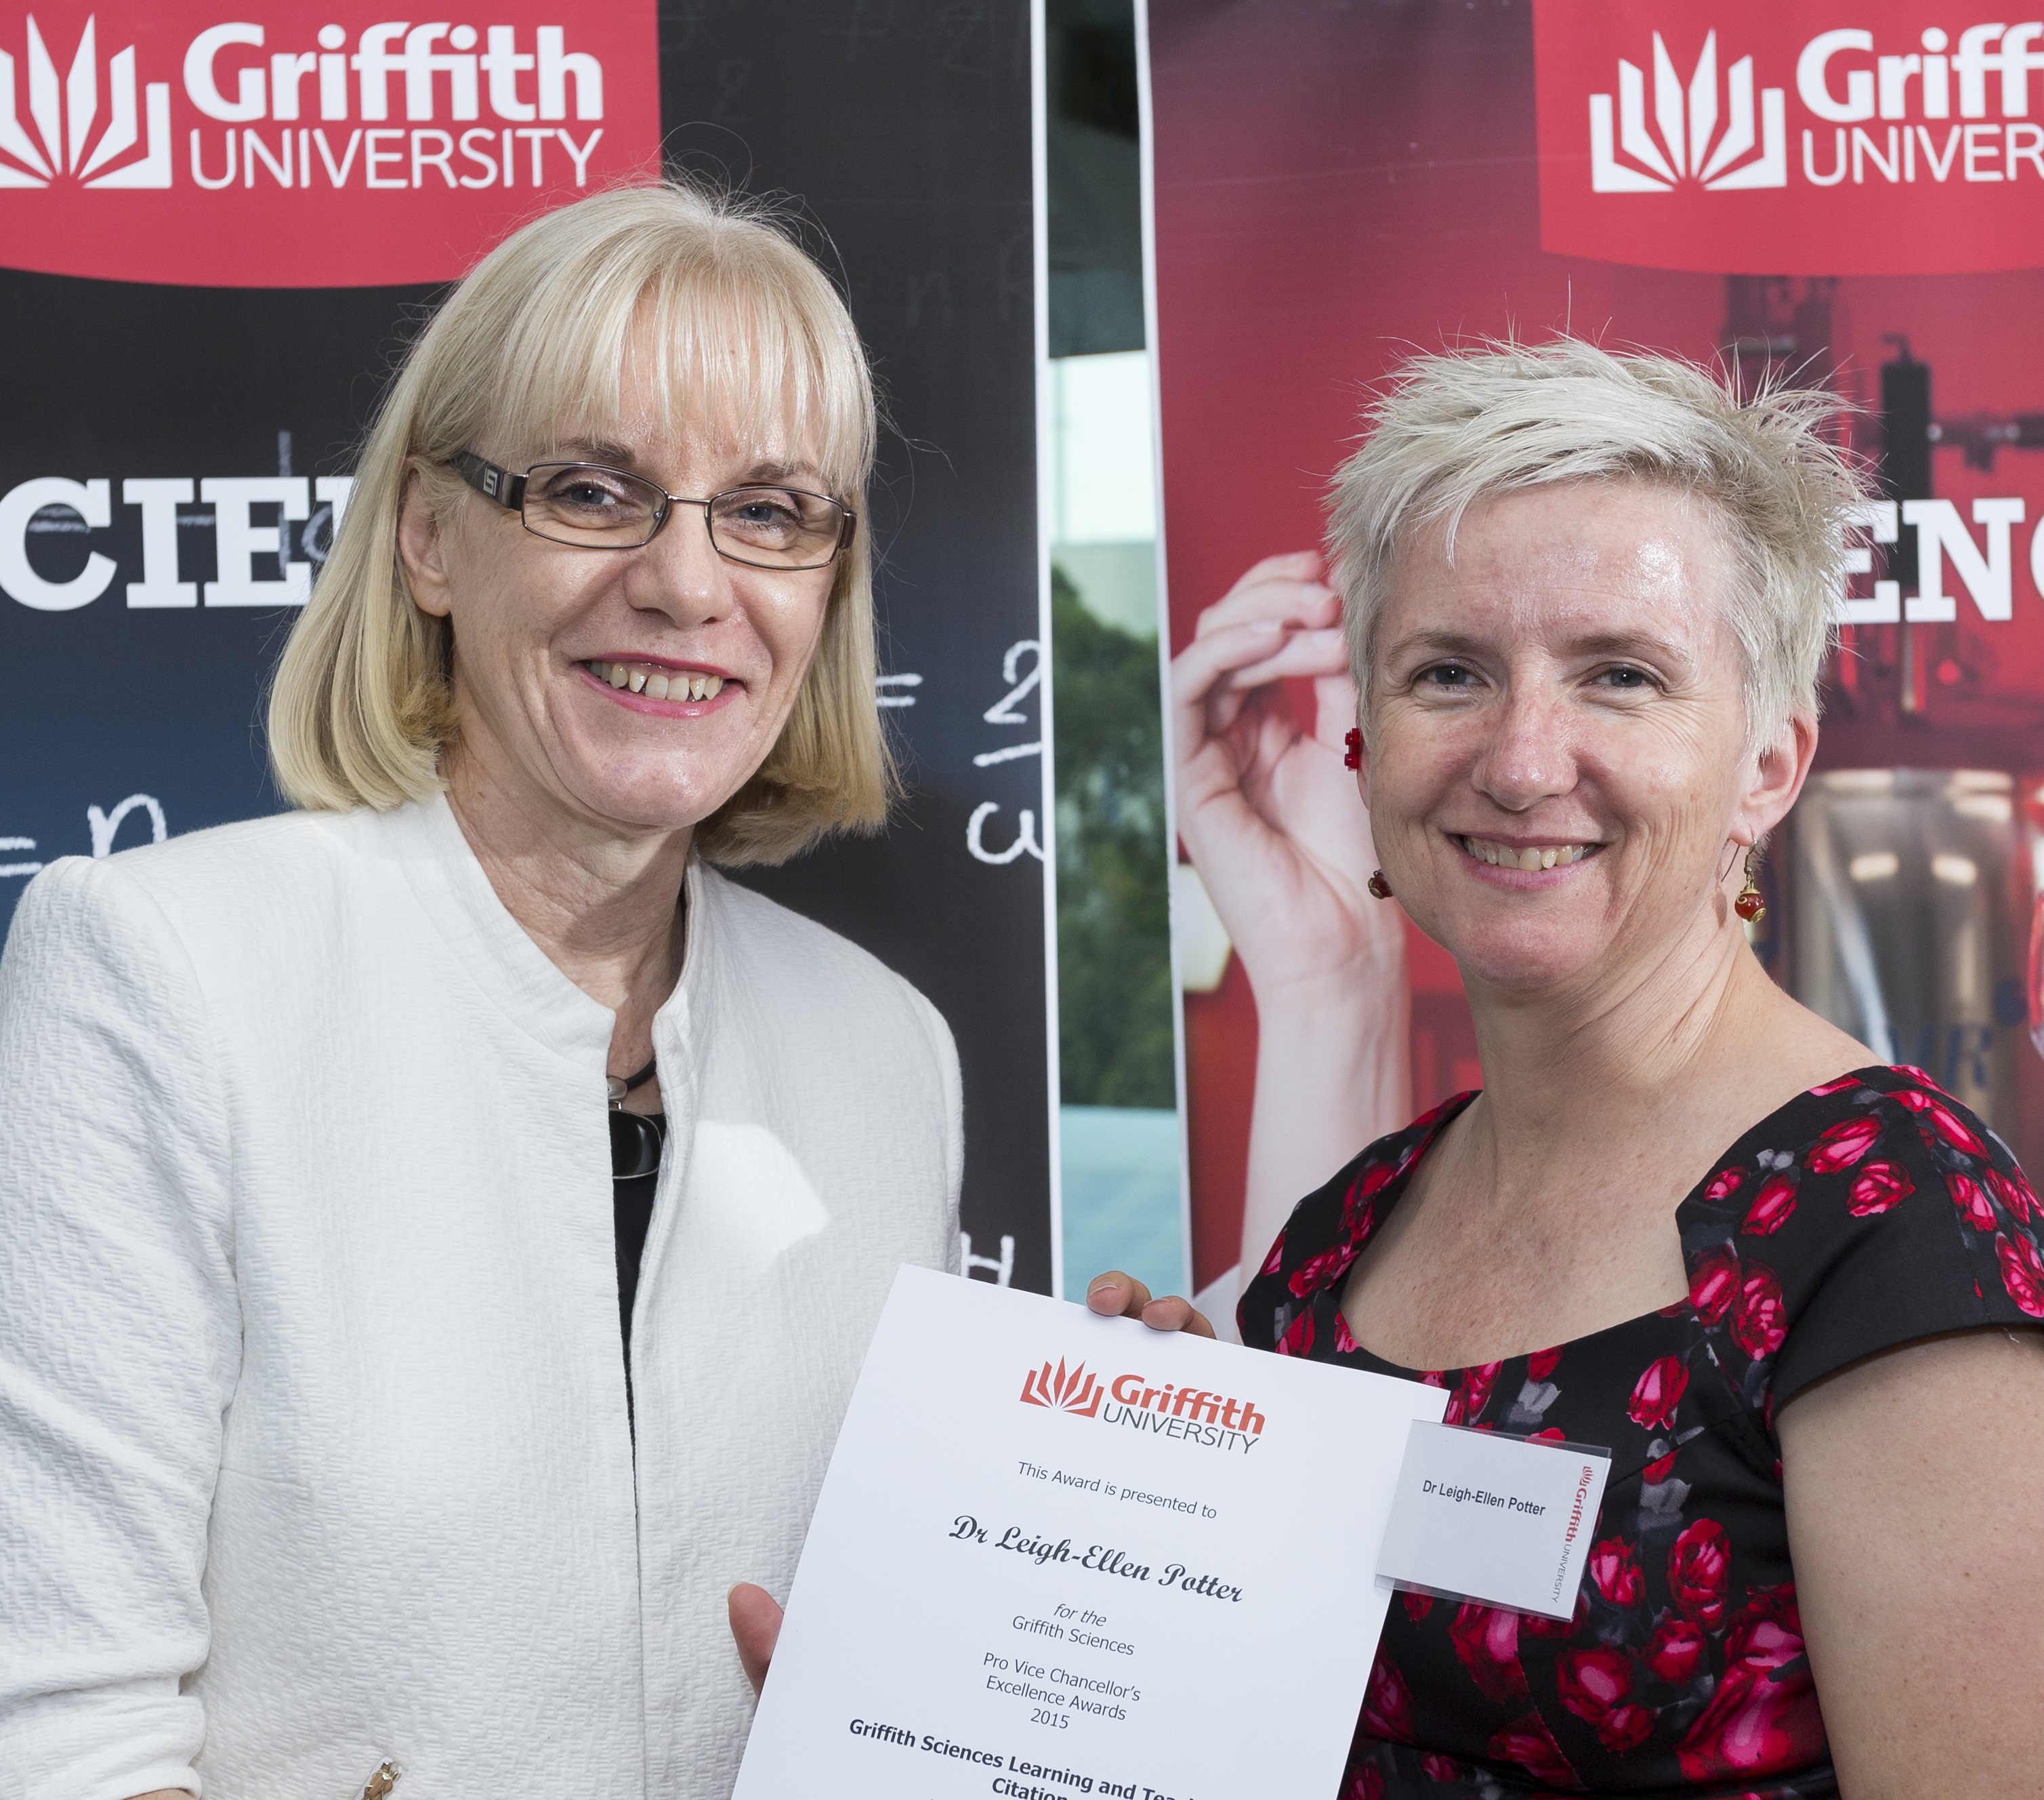 Pro Vice Chancellor (Griffith Sciences) Professor Debra Henly and Dr Leigh-Ellen Potter, from the School of Information and Communication Technology